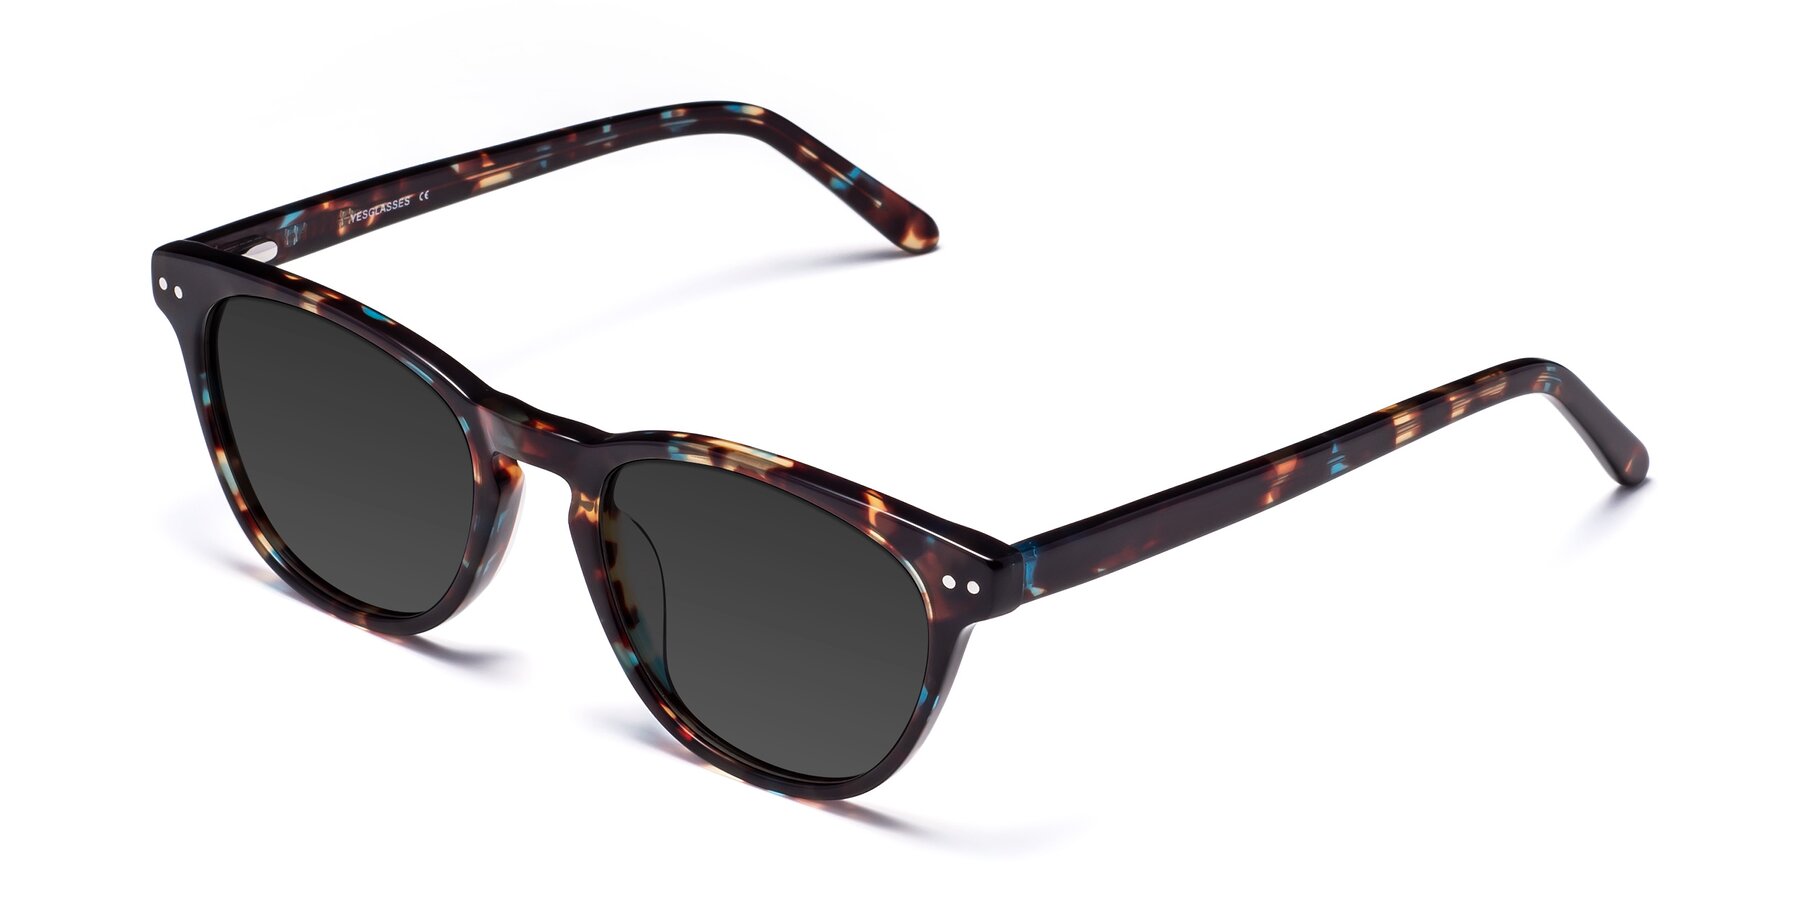 Angle of Blaze in Tortoise-Blue with Gray Tinted Lenses